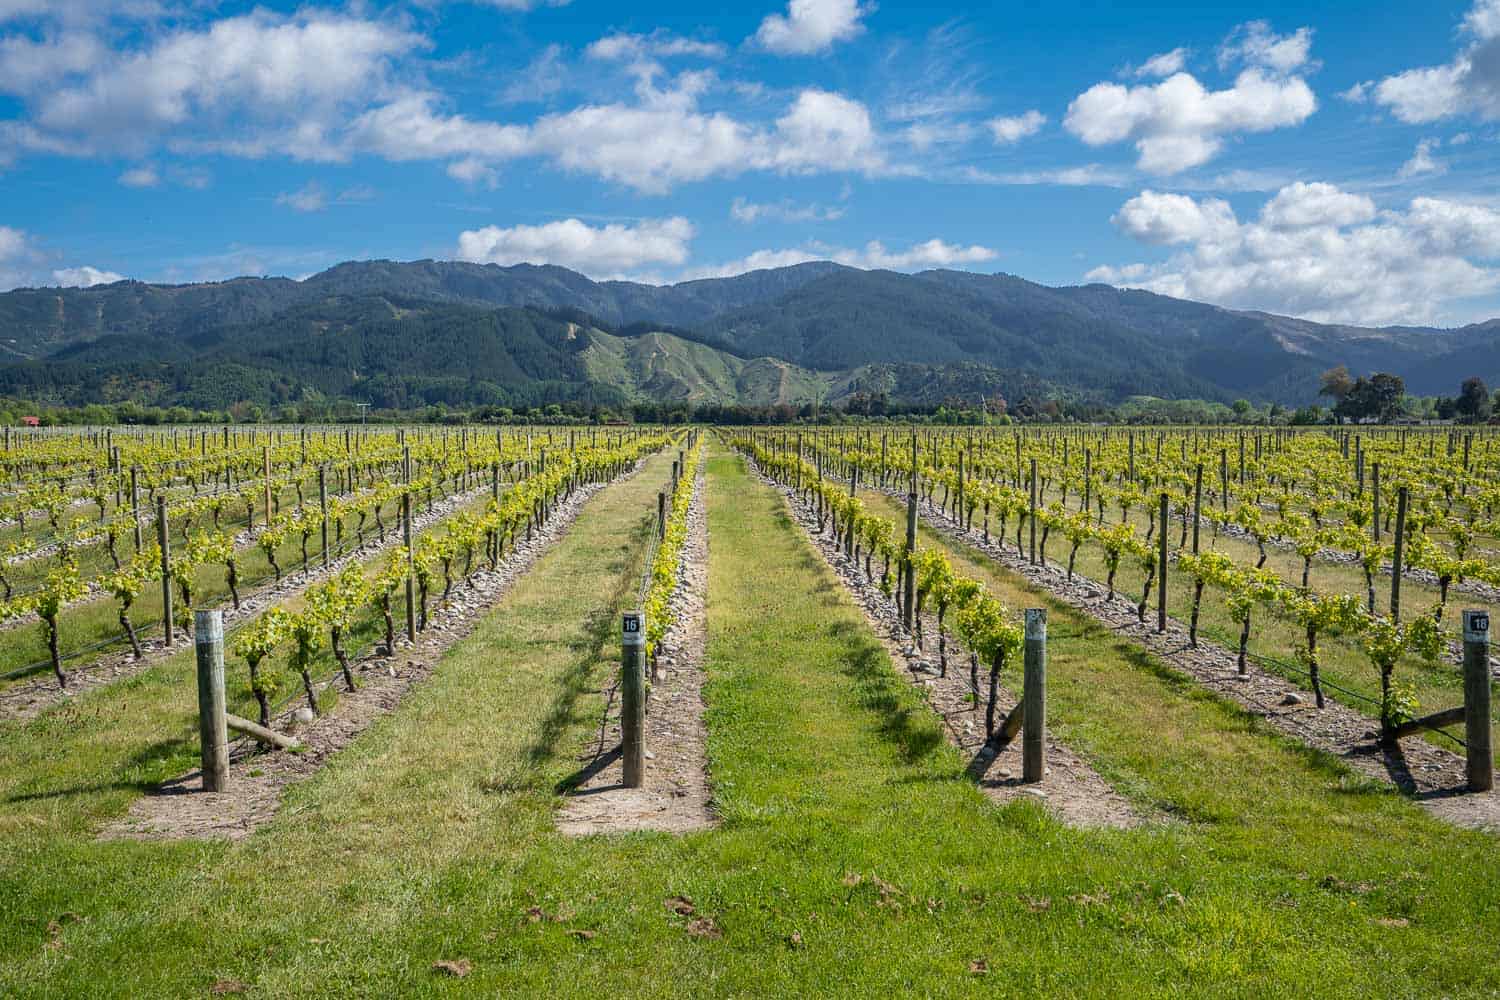 A vineyard in Marlborough, New Zealand - this guide has the best tips for exploring the Marlborough wineries